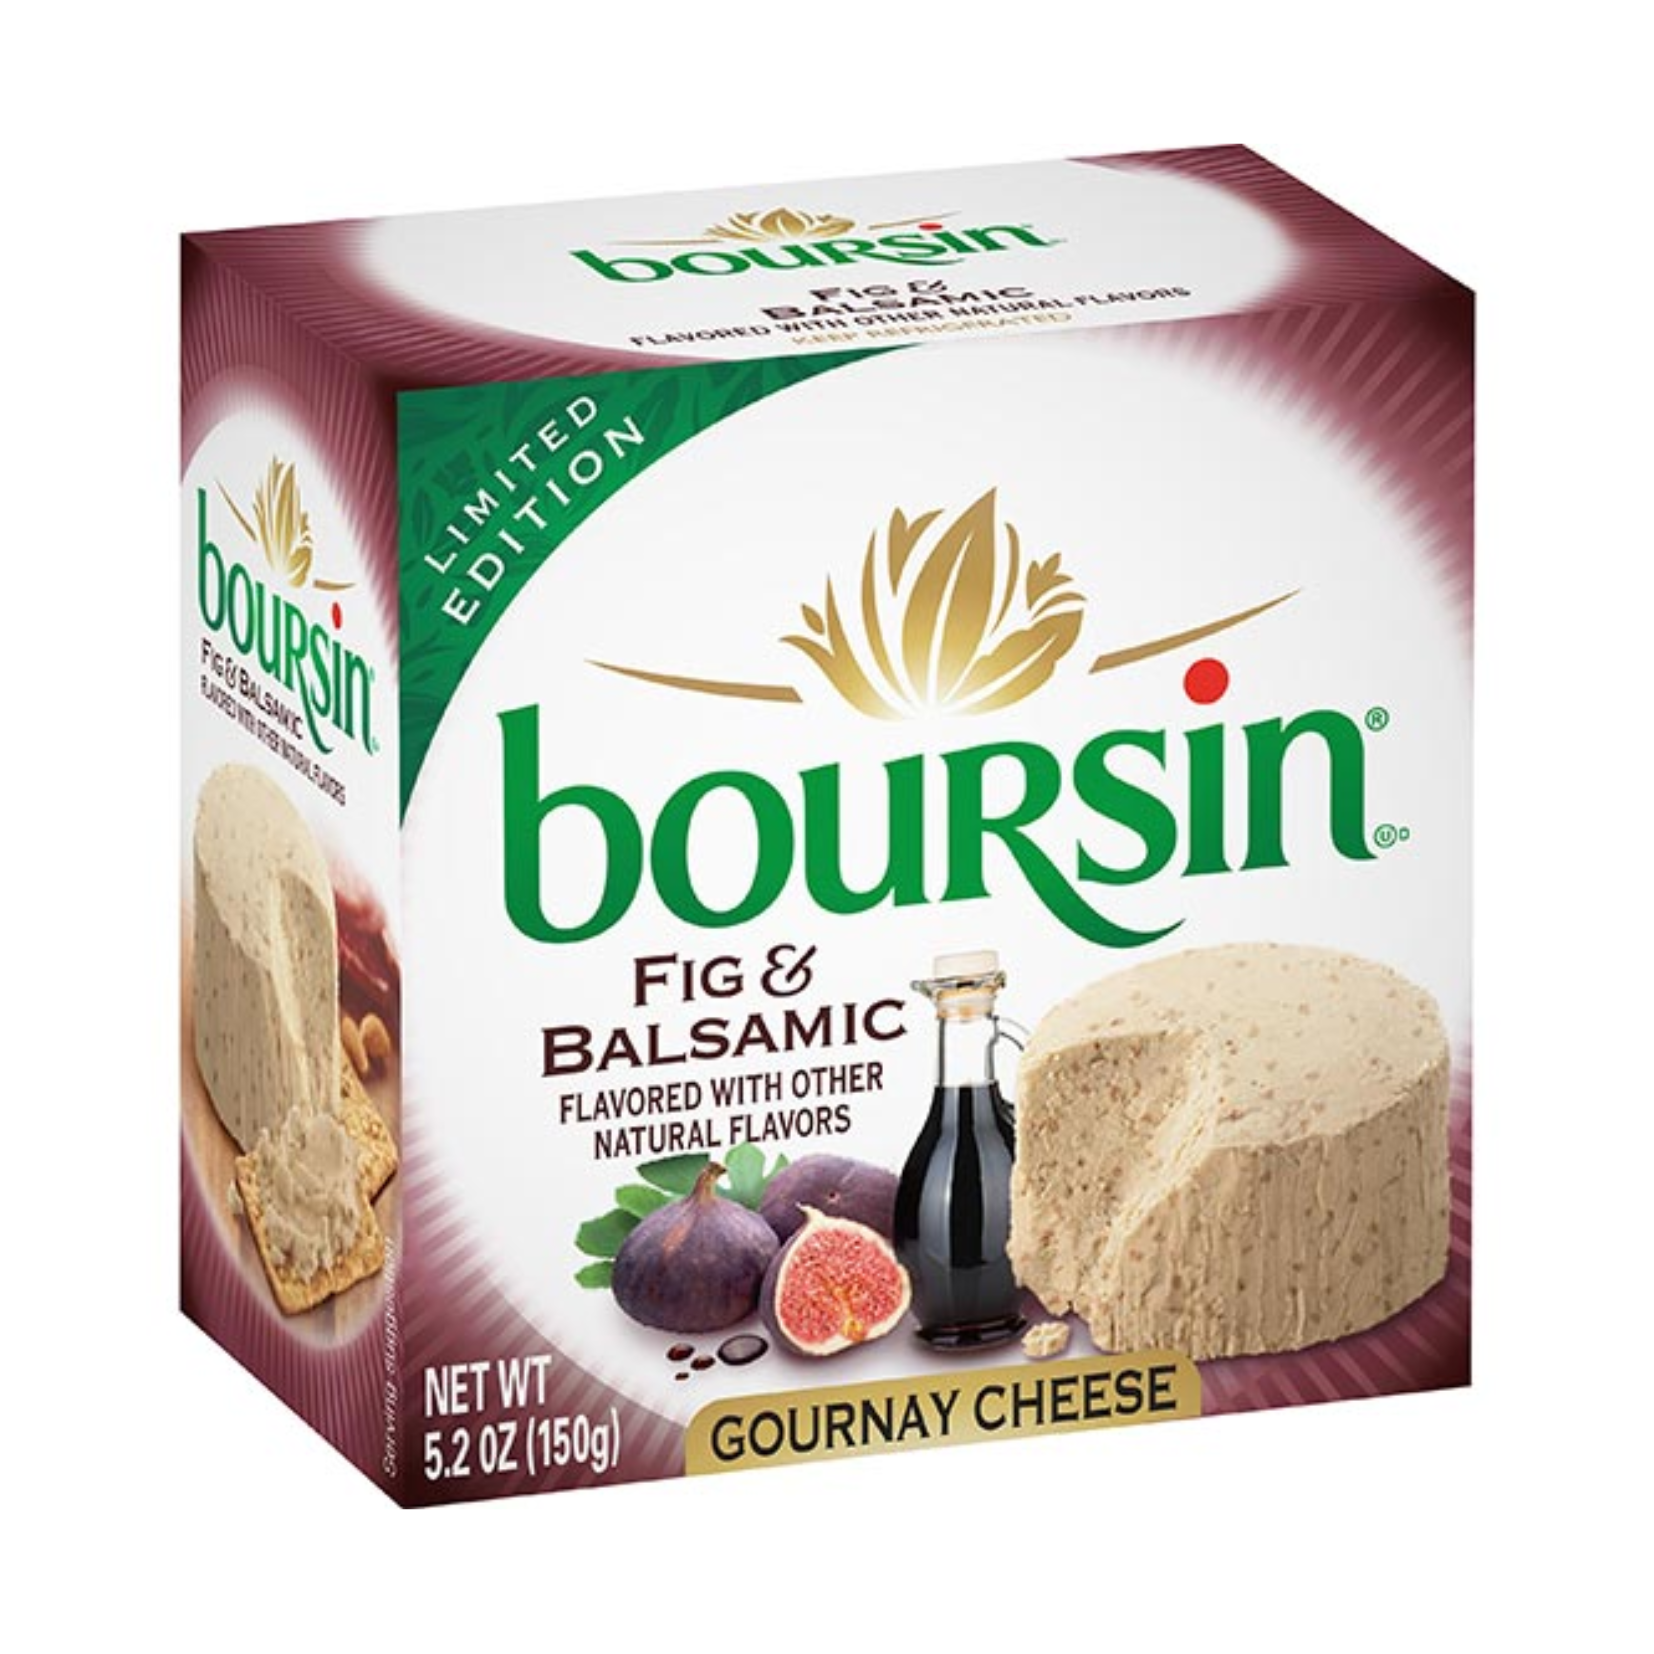 Boursin Fig & Balsamic Cheese 150g